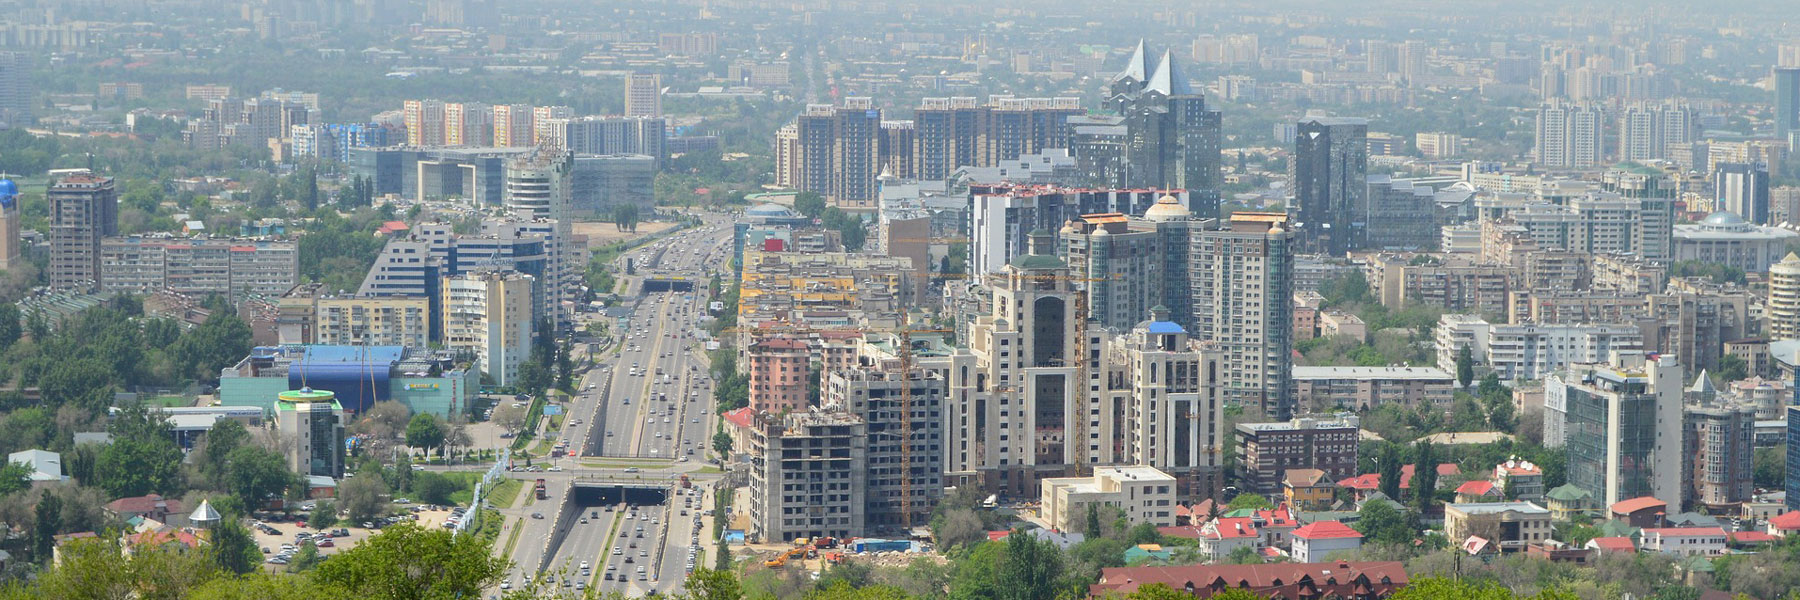 view of the Almaty city